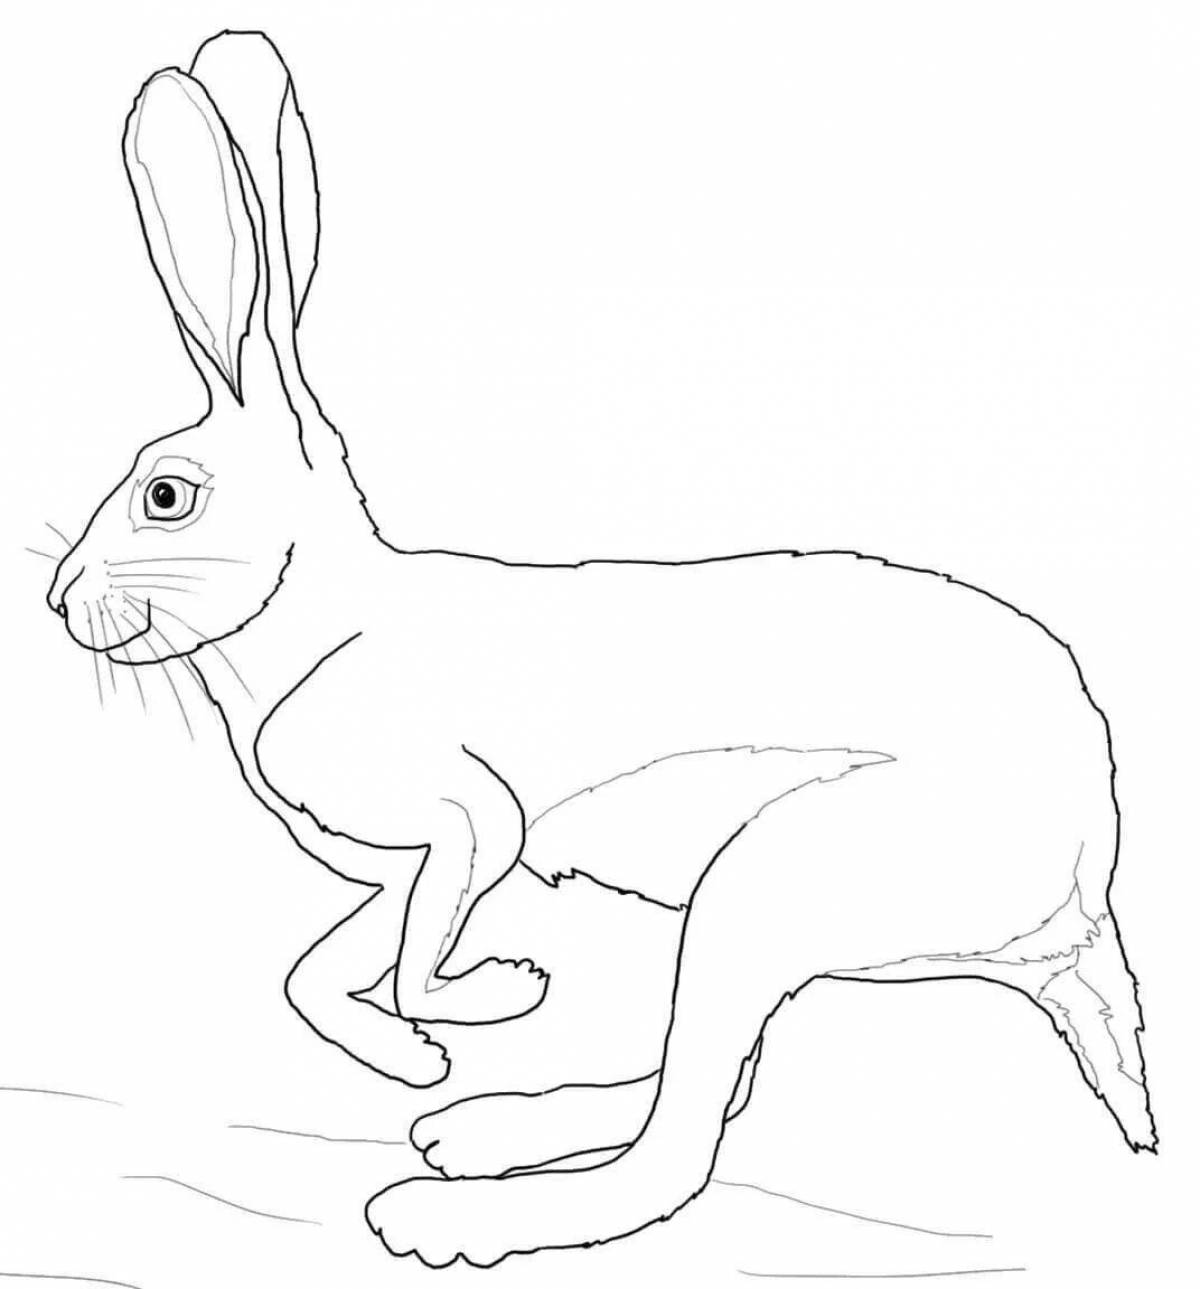 Coloring book bright running hare